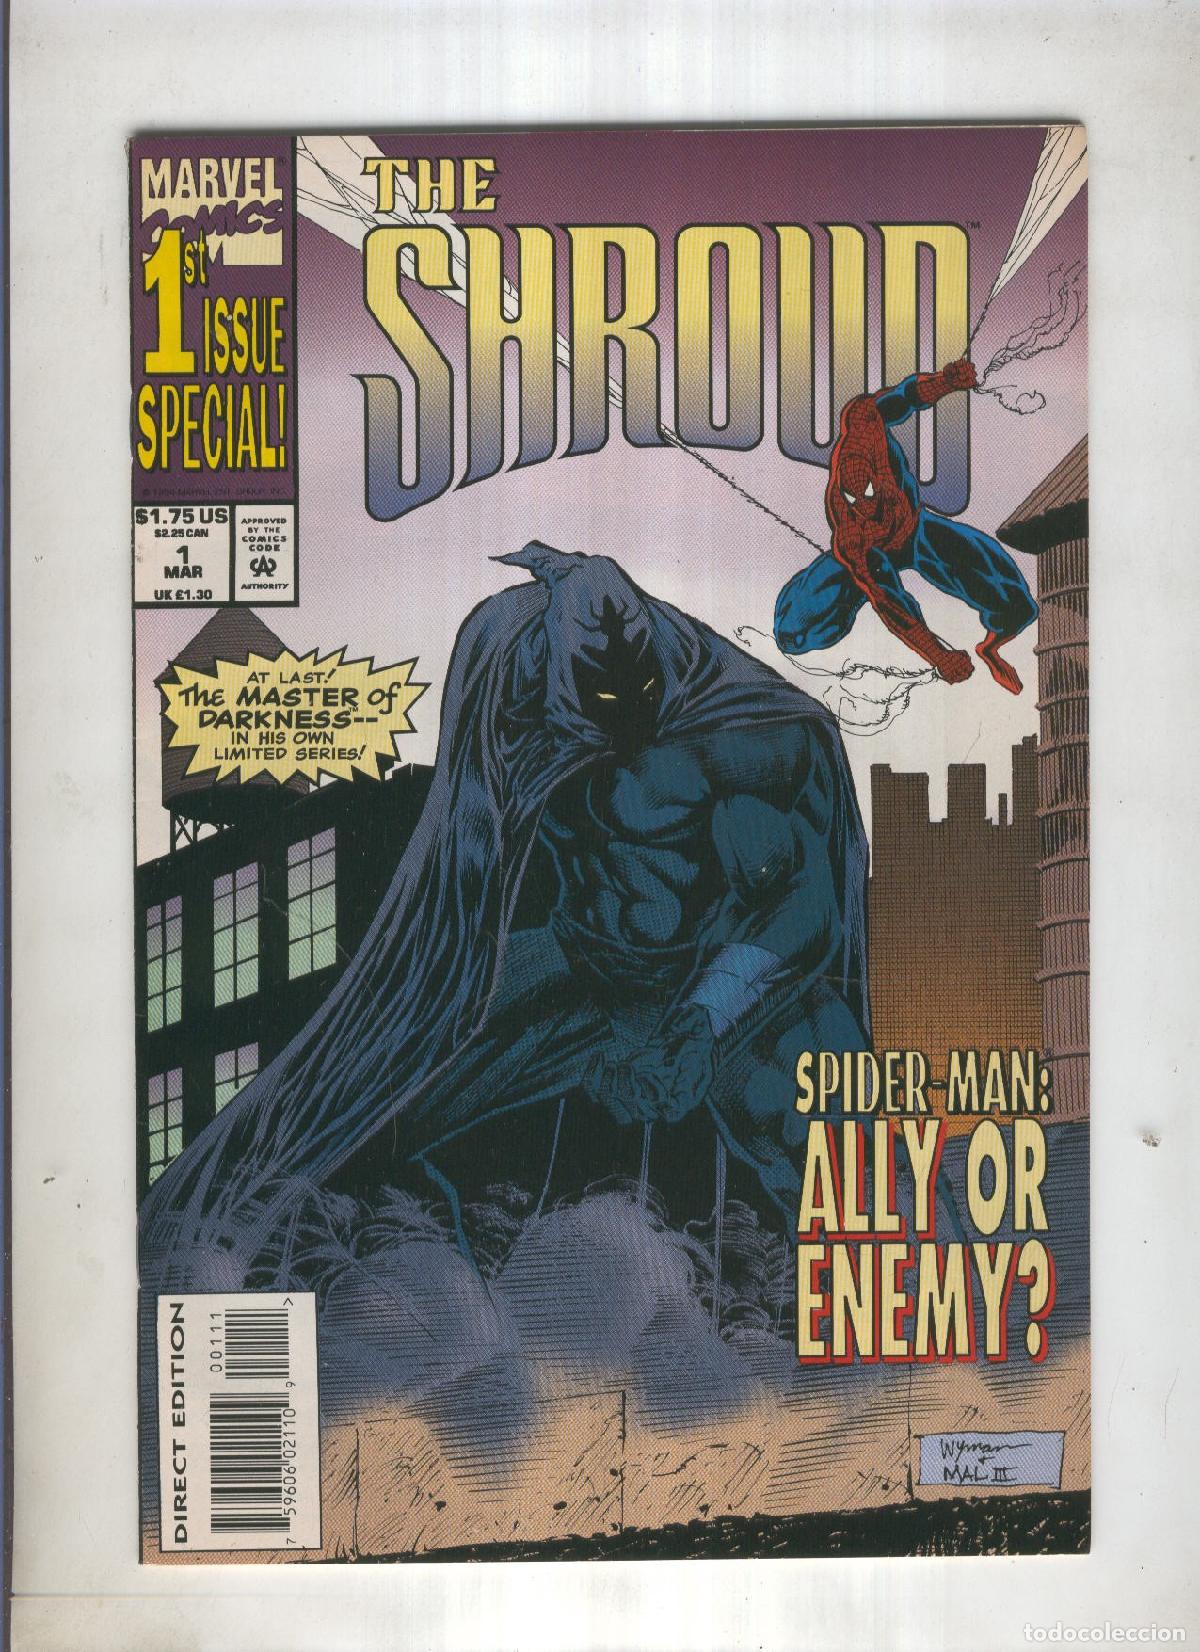 the shroud numero 01: spiderman ally or enemy? - Buy Unclassified antique  comics and tebeos on todocoleccion